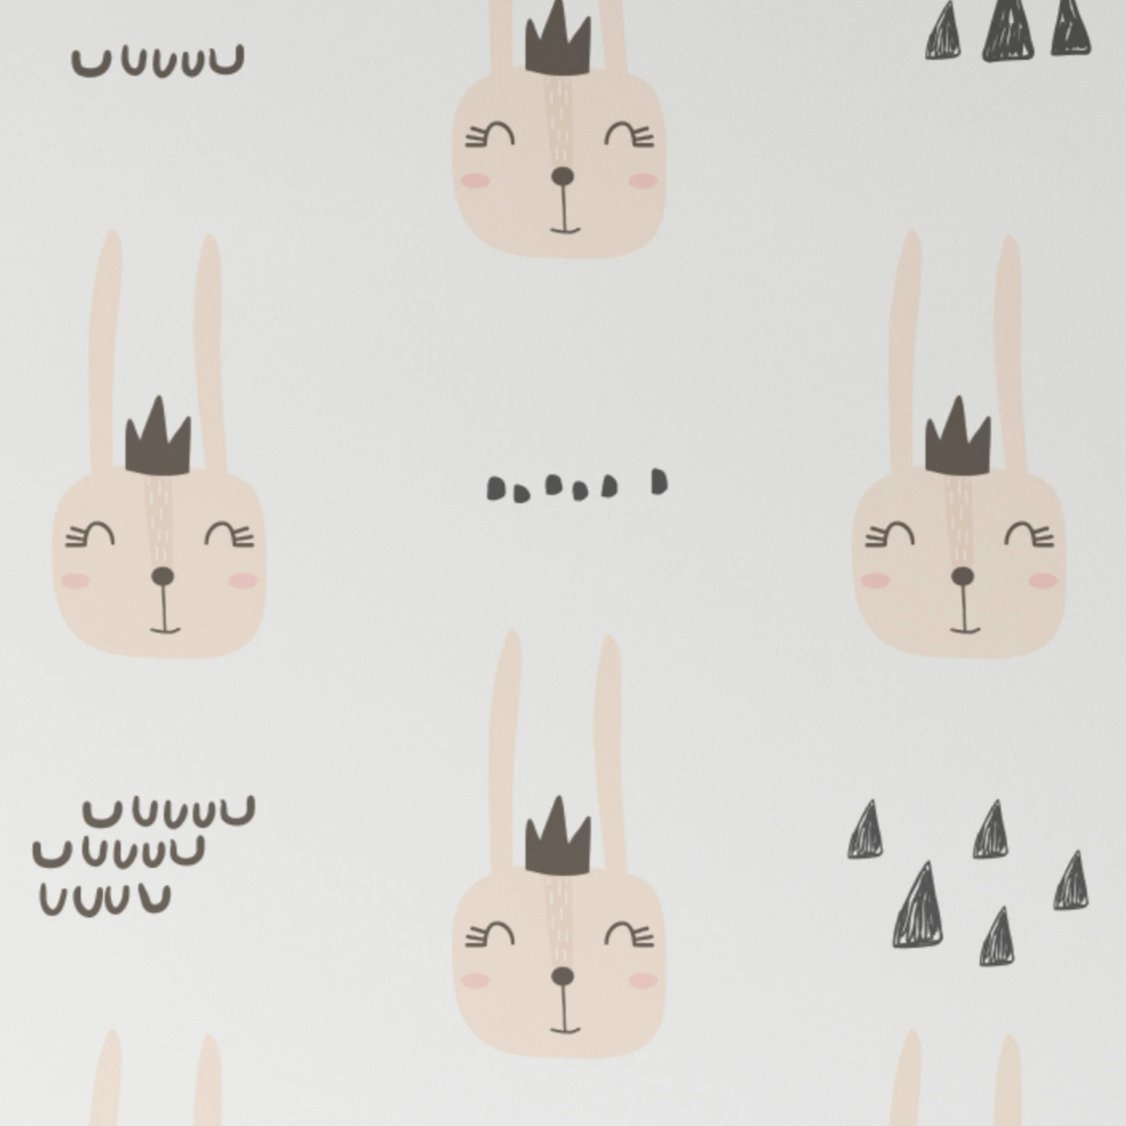 A close-up view of Cute Bunnies Wallpaper showcasing a pattern of adorable bunny faces with neutral pastel tones. The wallpaper features minimalist bunny illustrations with details like eyes, whiskers, and playful geometric shapes, ideal for a soft, serene nursery decor.